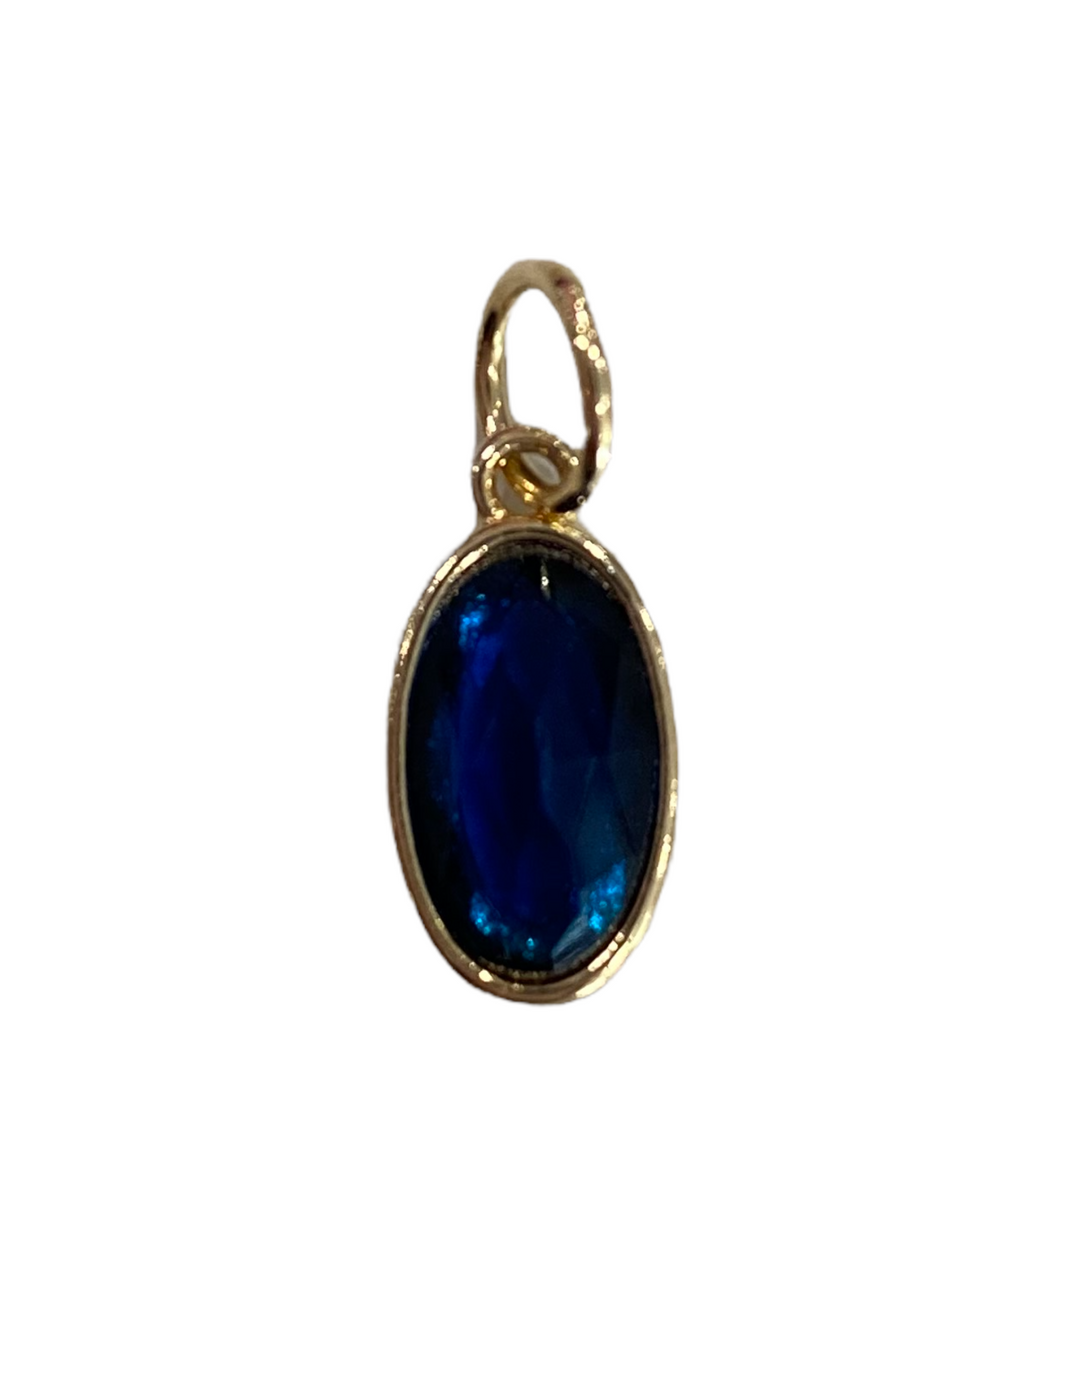 GOLD OVAL MONTANA CHARM - Kingfisher Road - Online Boutique